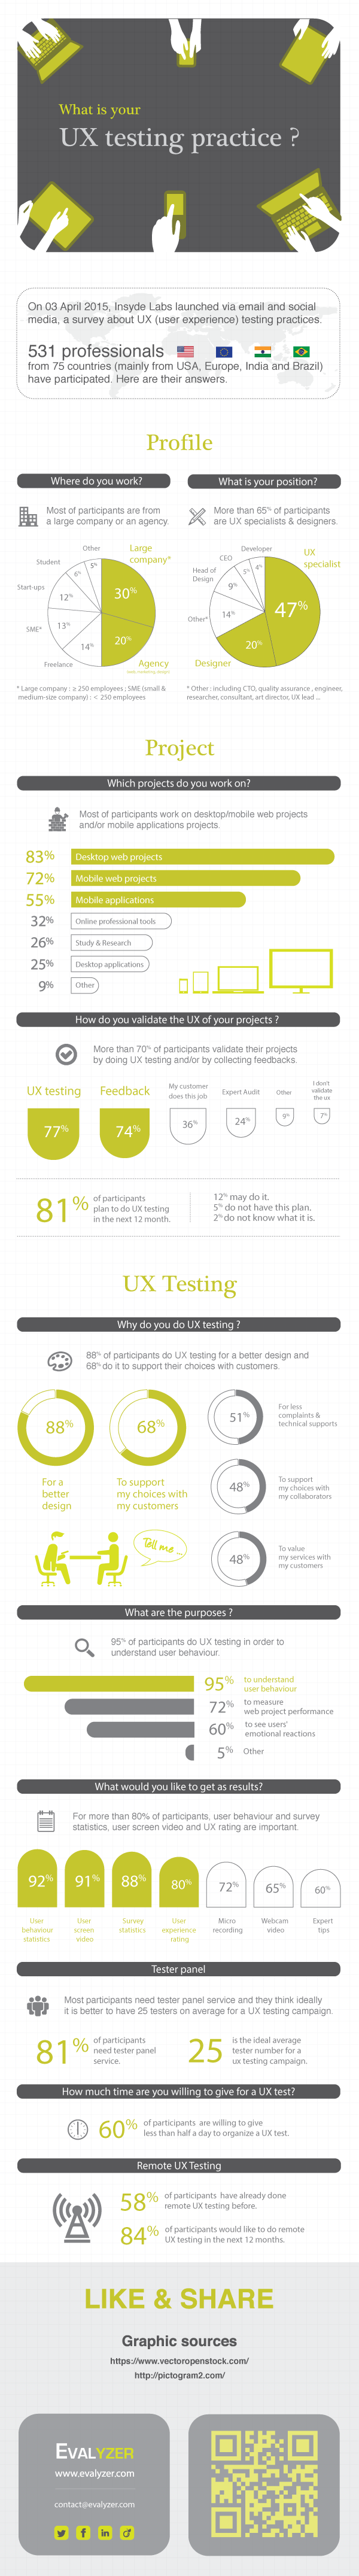 Survey-results-what-is-you-ux-testing-practices